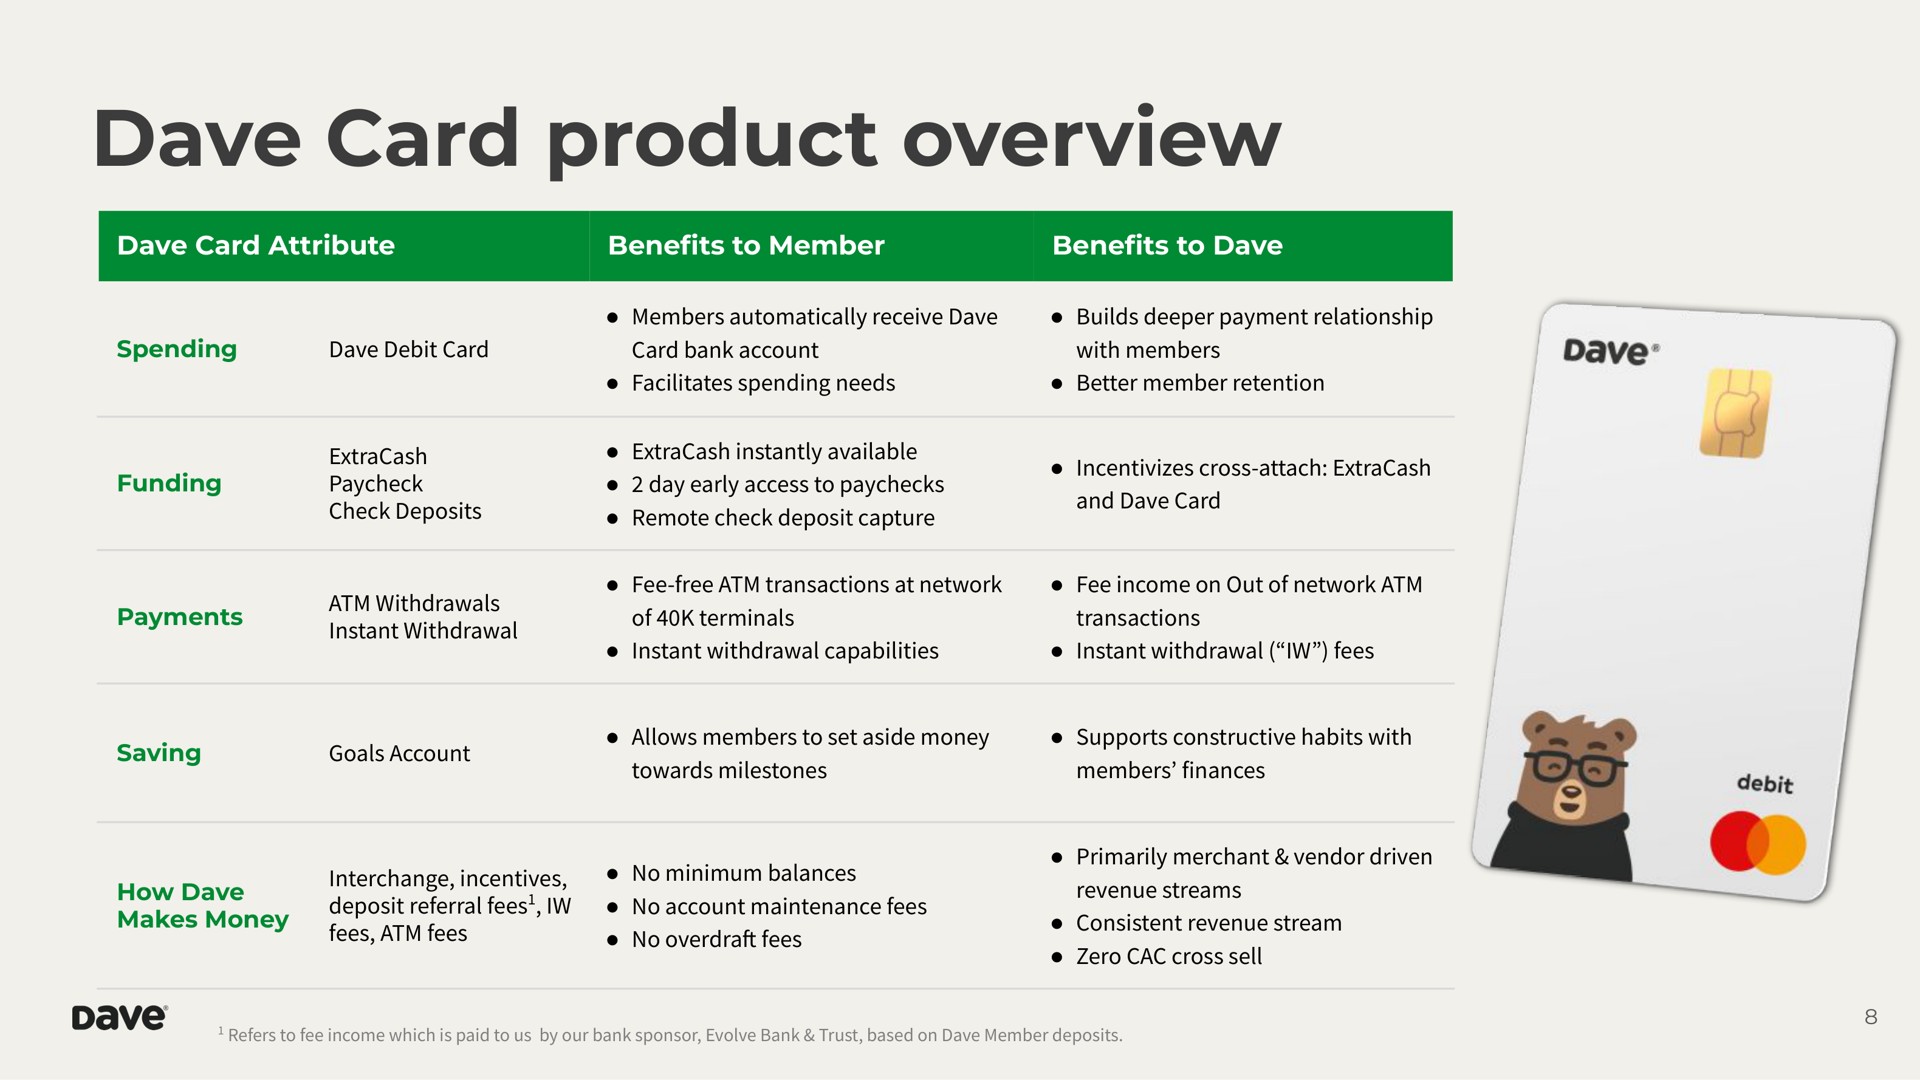 card product overview | Dave